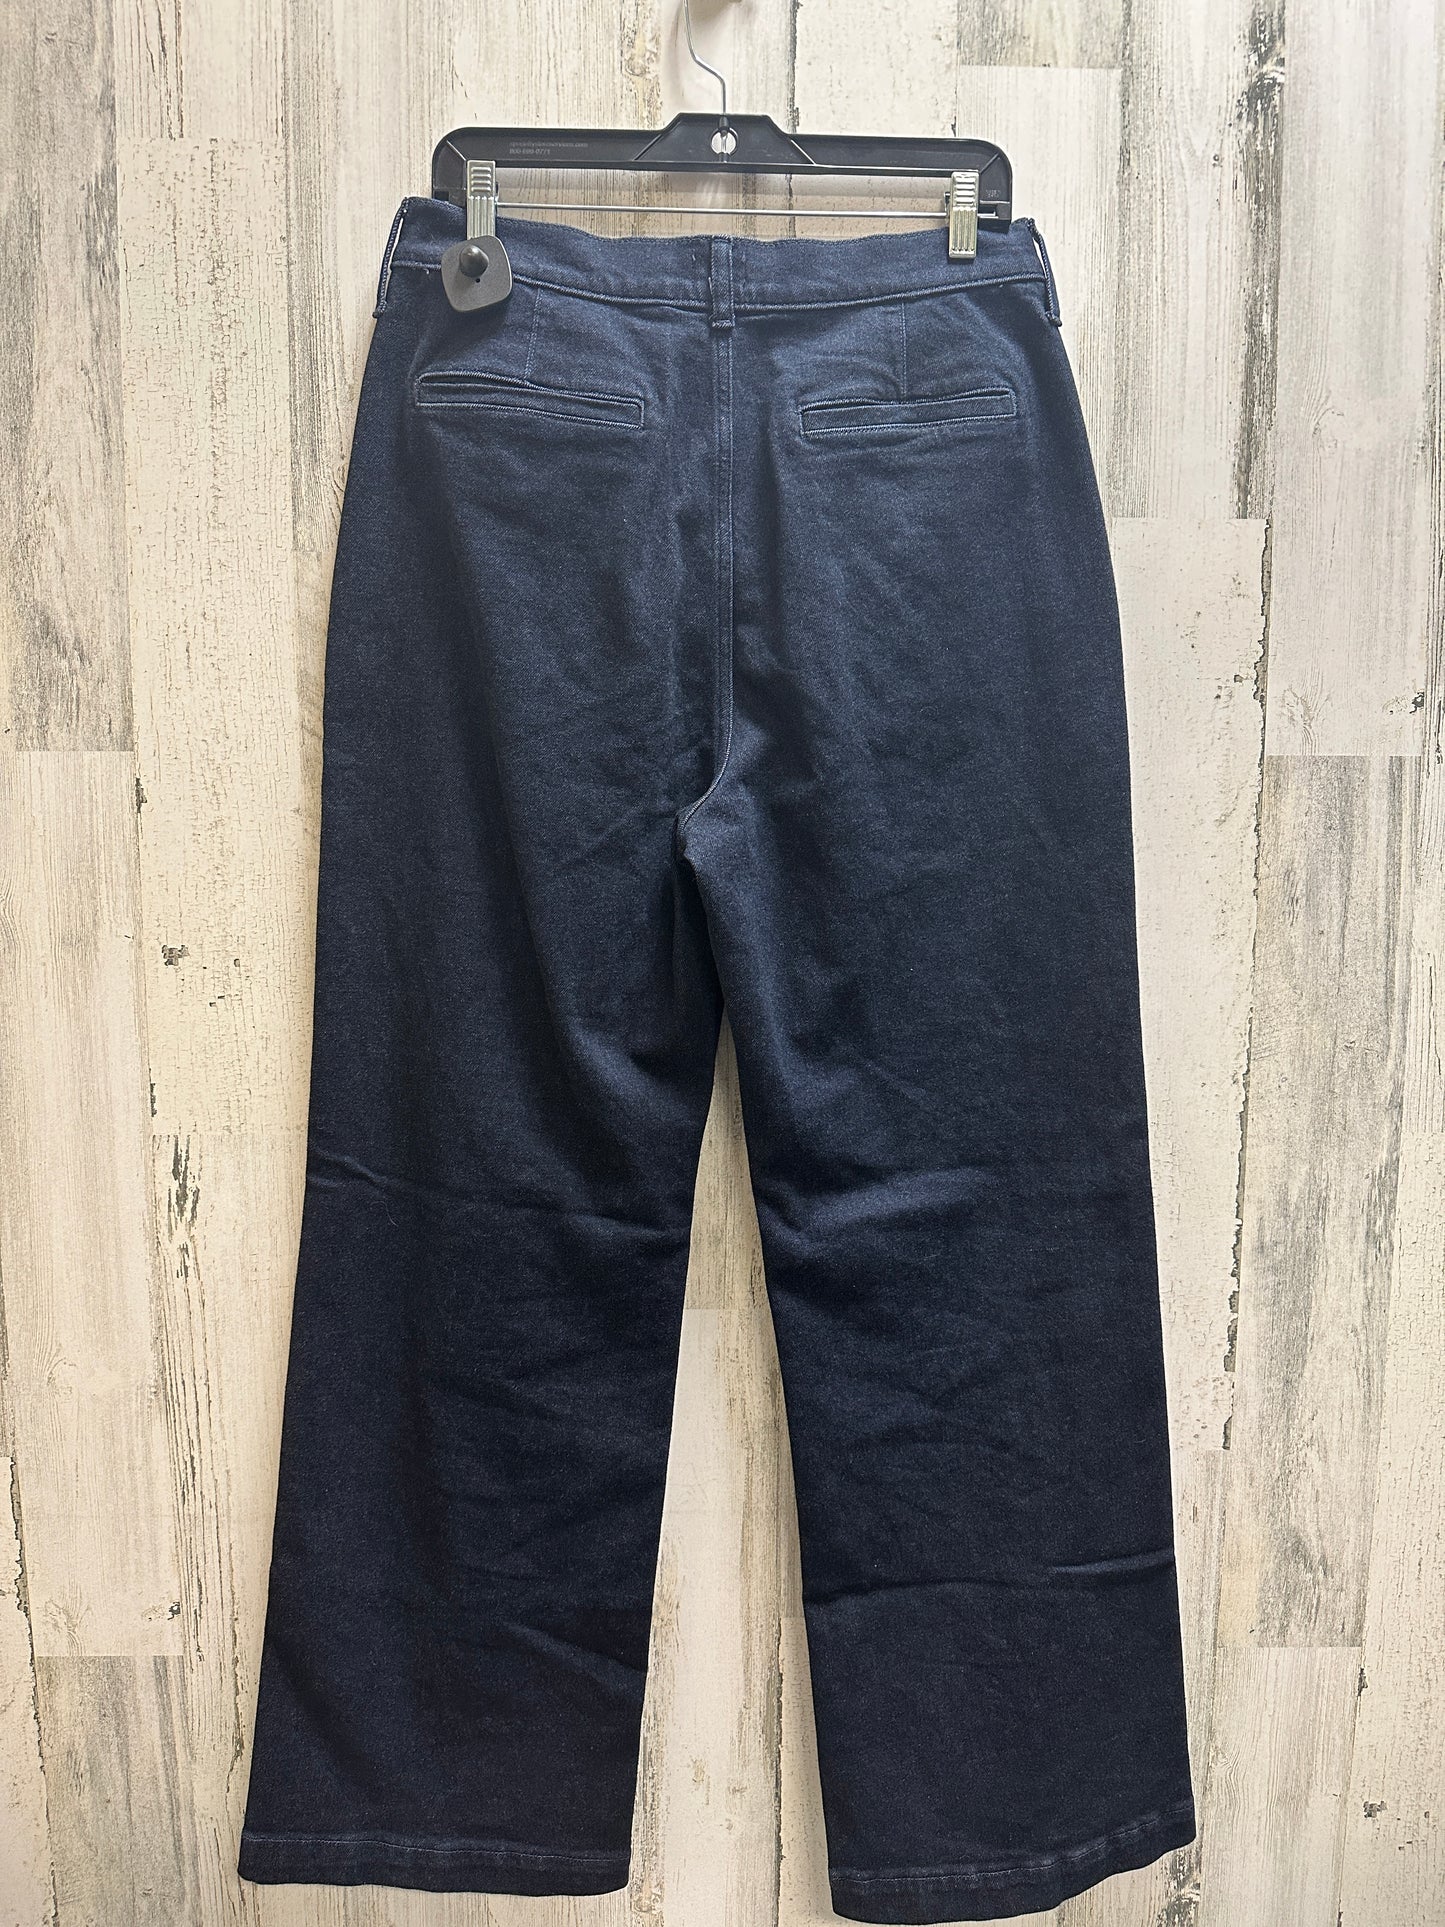 Jeans Boot Cut By J Crew  Size: 10